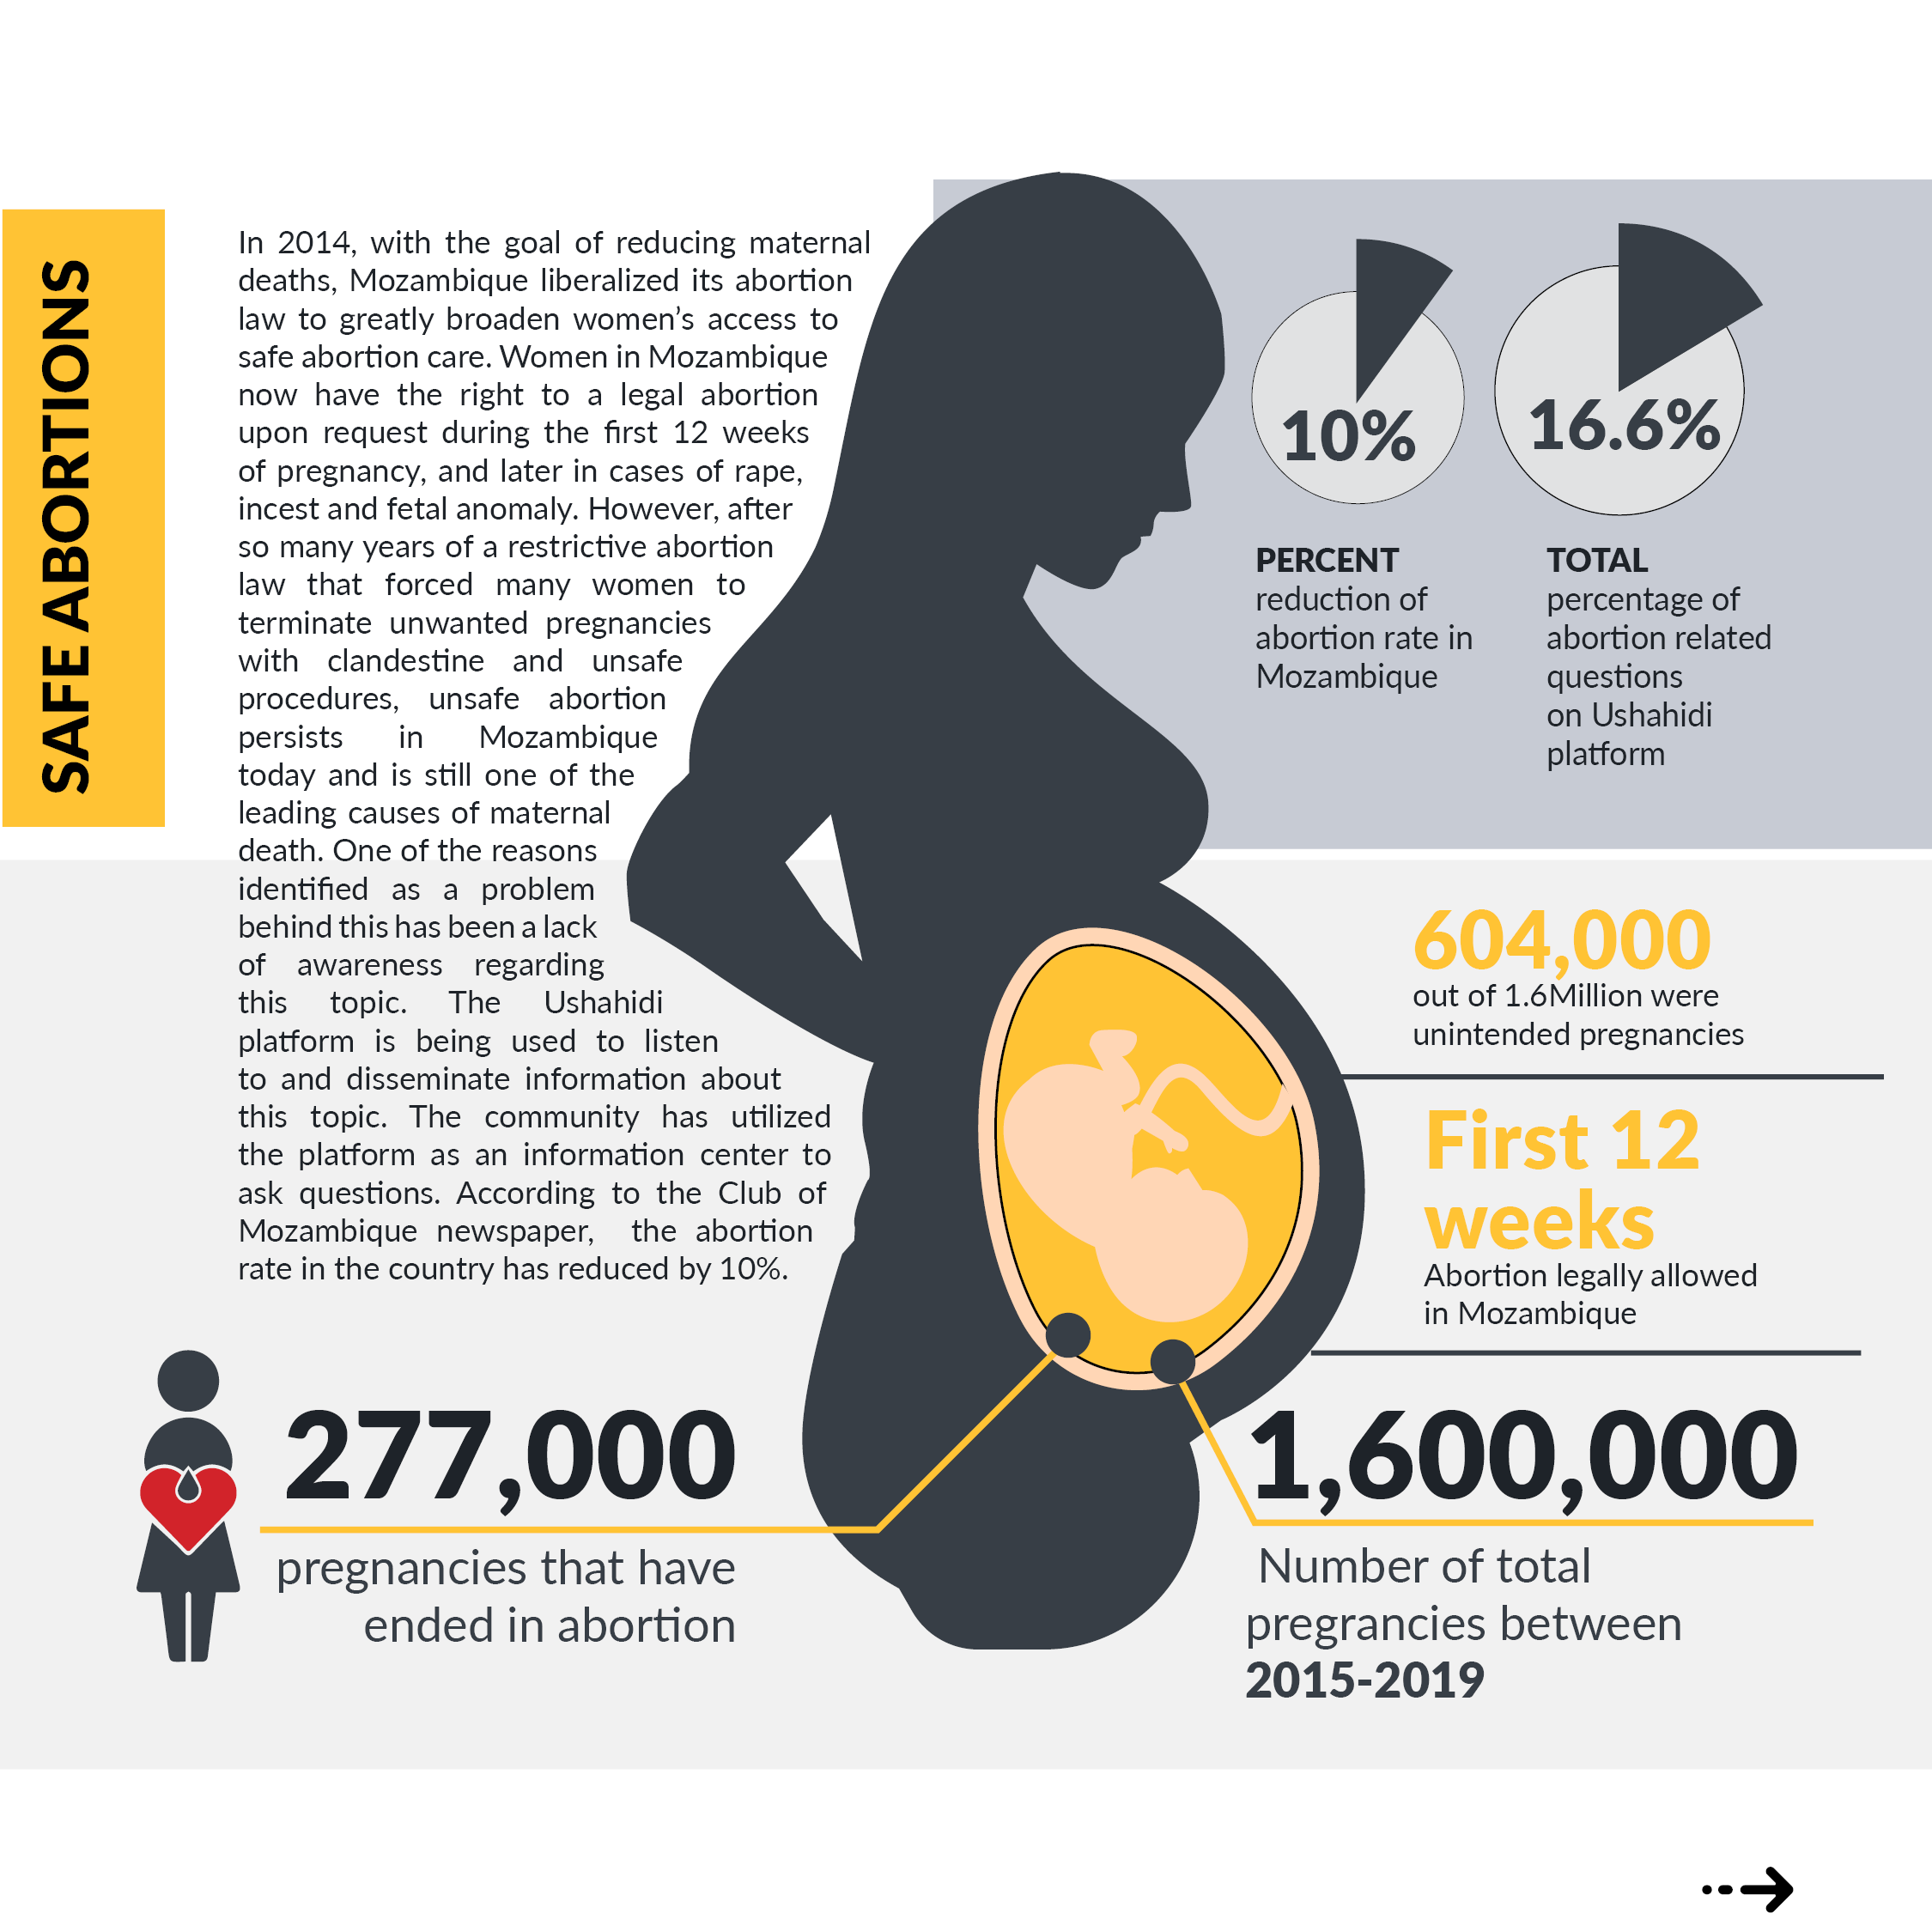 Statistics on abortion in Mozambique